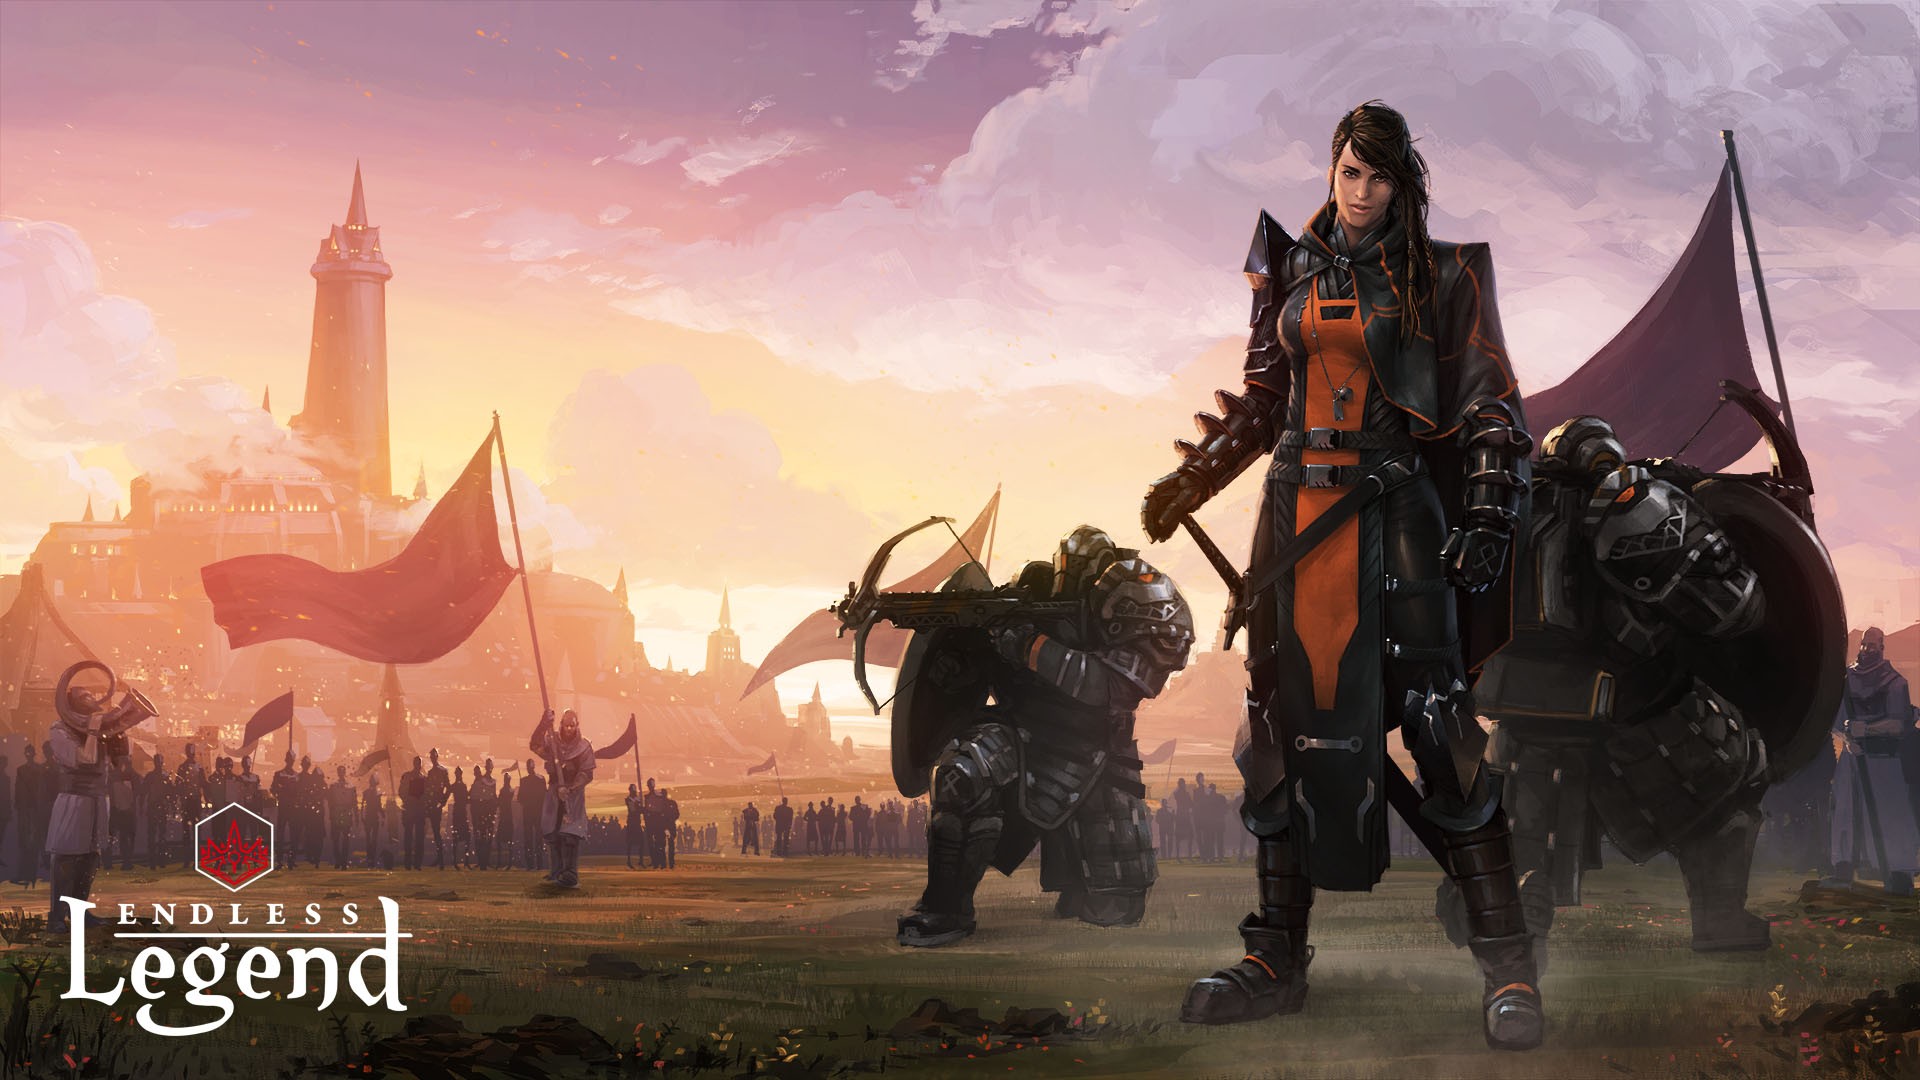 General 1920x1080 Endless Legend PC gaming sky video game girls